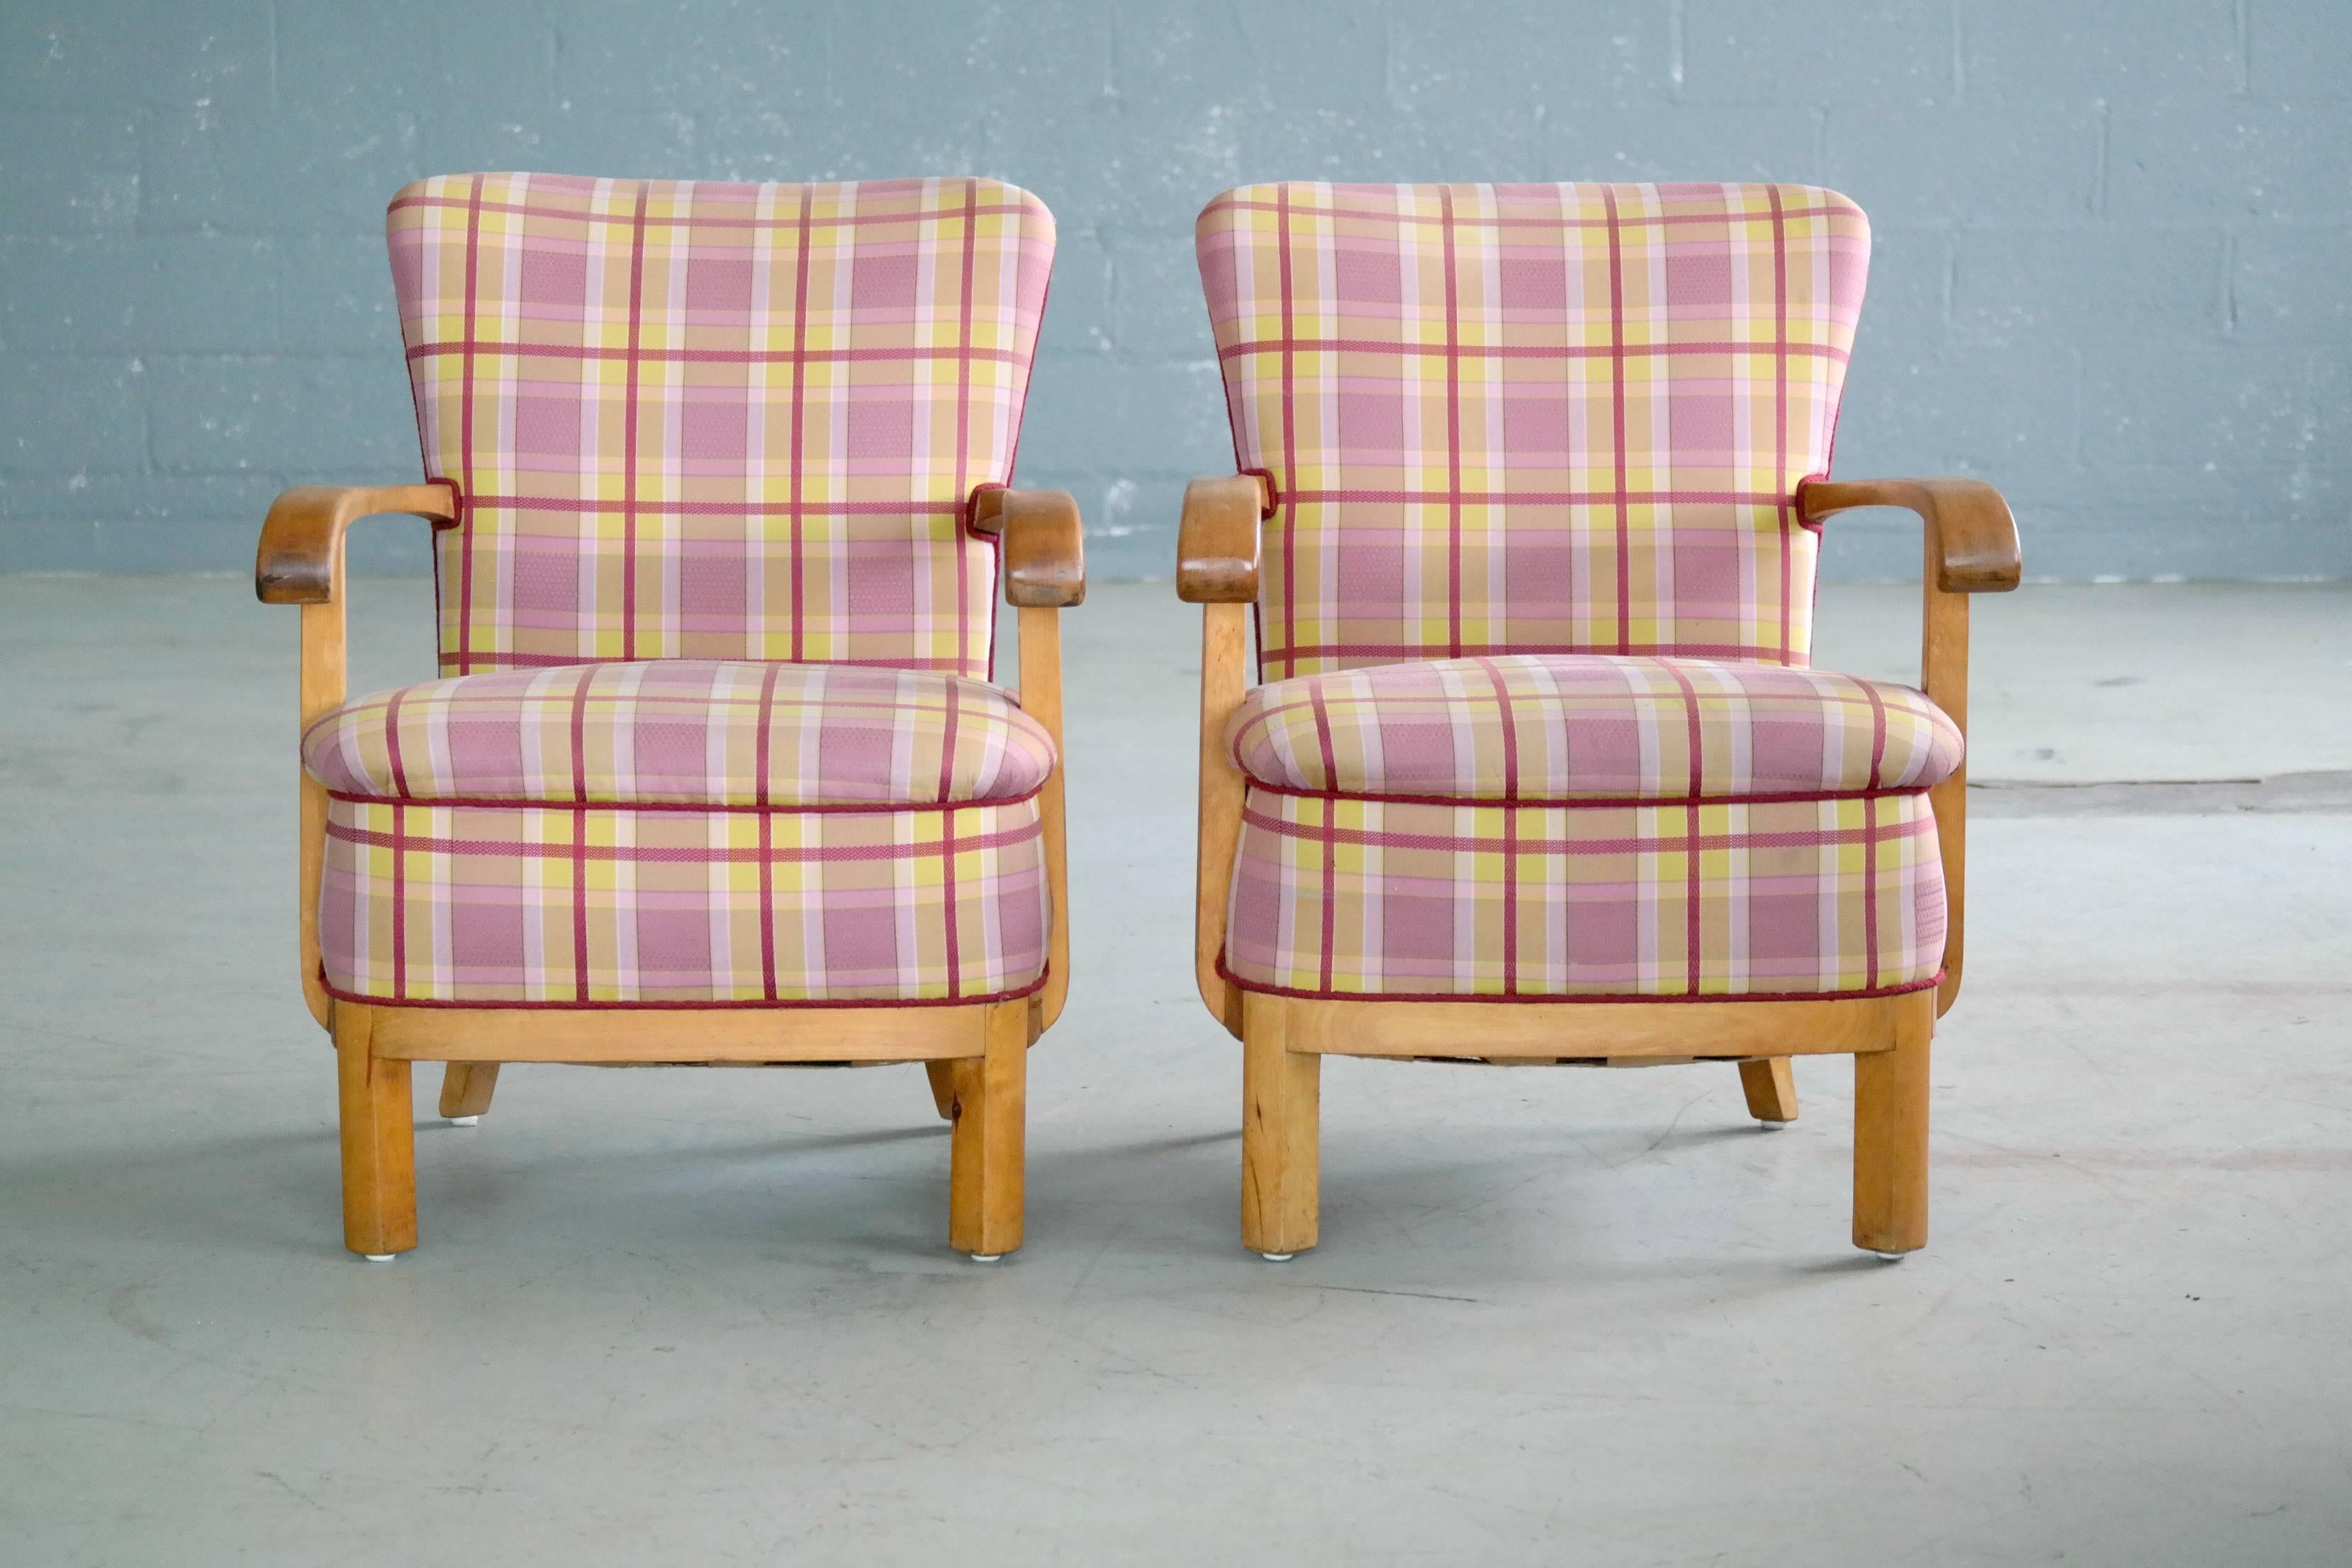 Very charming and cheerful pair of lounge chairs probably made around late 1930s-early 1940s in Denmark by a local furniture maker. Similar in style to many of Fritz Hansen's designs and similar high quality. Recently up-holstered with the fabric